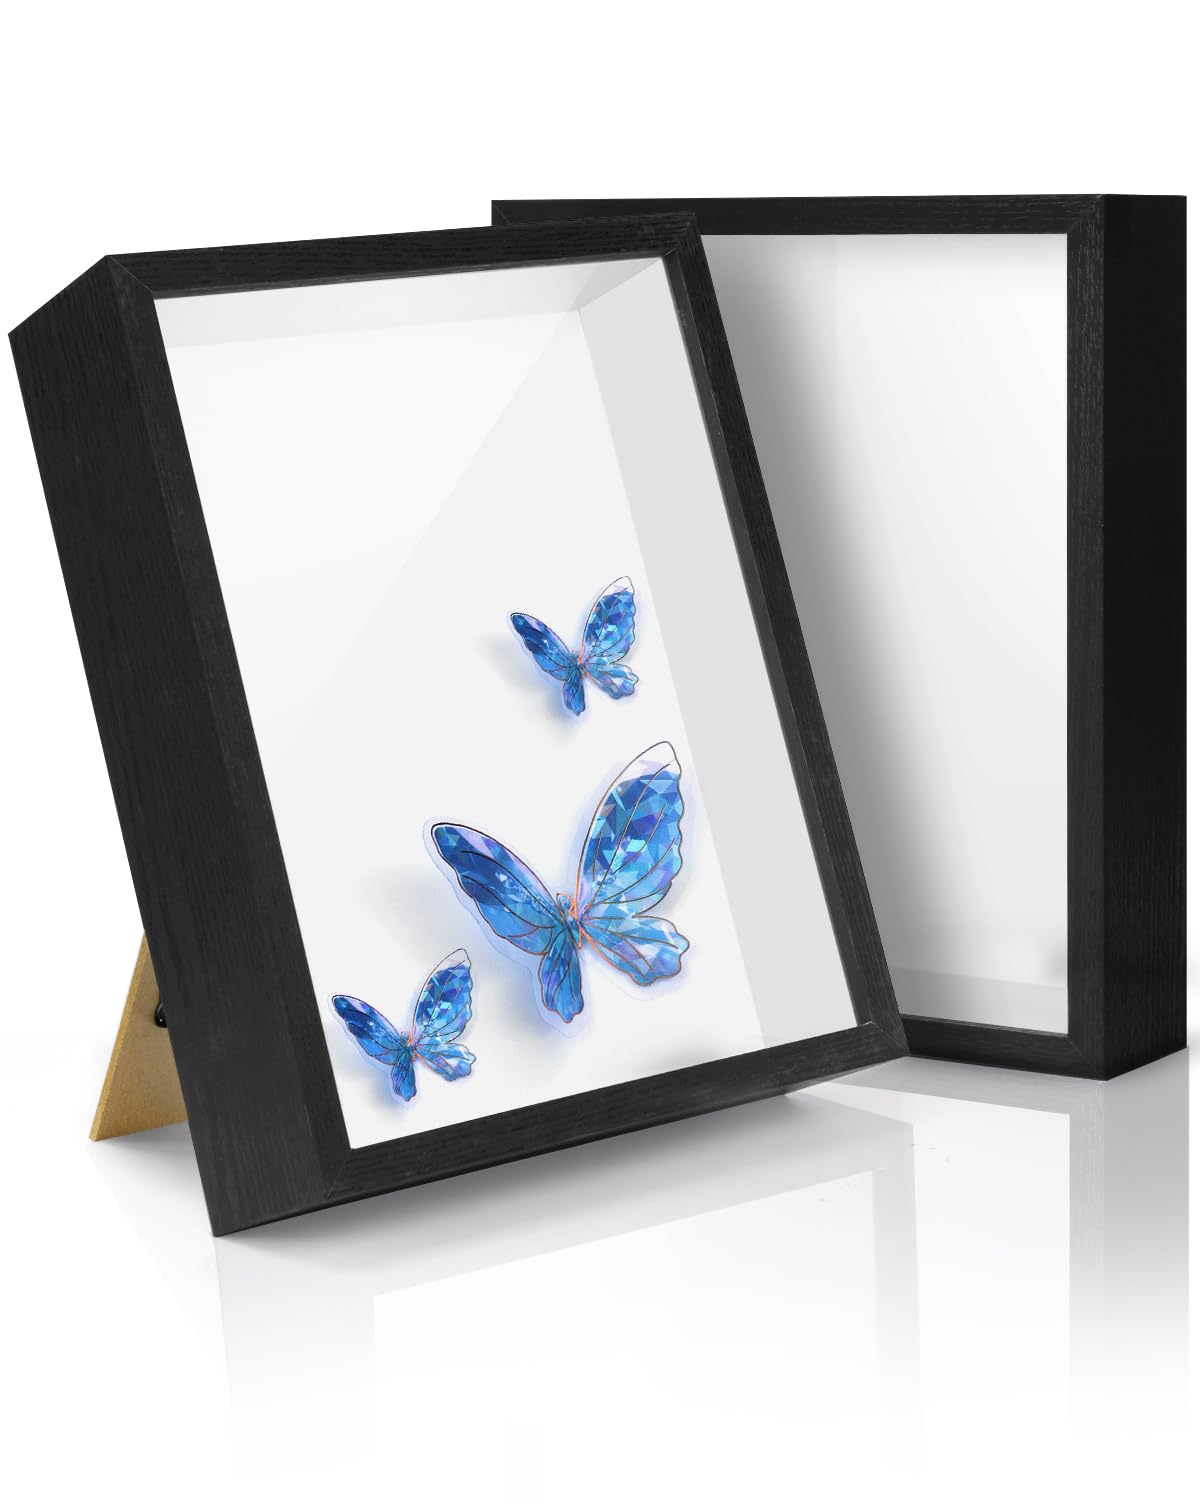 Shadow Boxes 8 x 10 in, 2 Pcs Black Shadow Boxes Frame, Tempered Glass Deep Photo Frame with 1.58 inches of Space for Displaying Photos, Keepsakes, Collectibles, etc&#x2026;